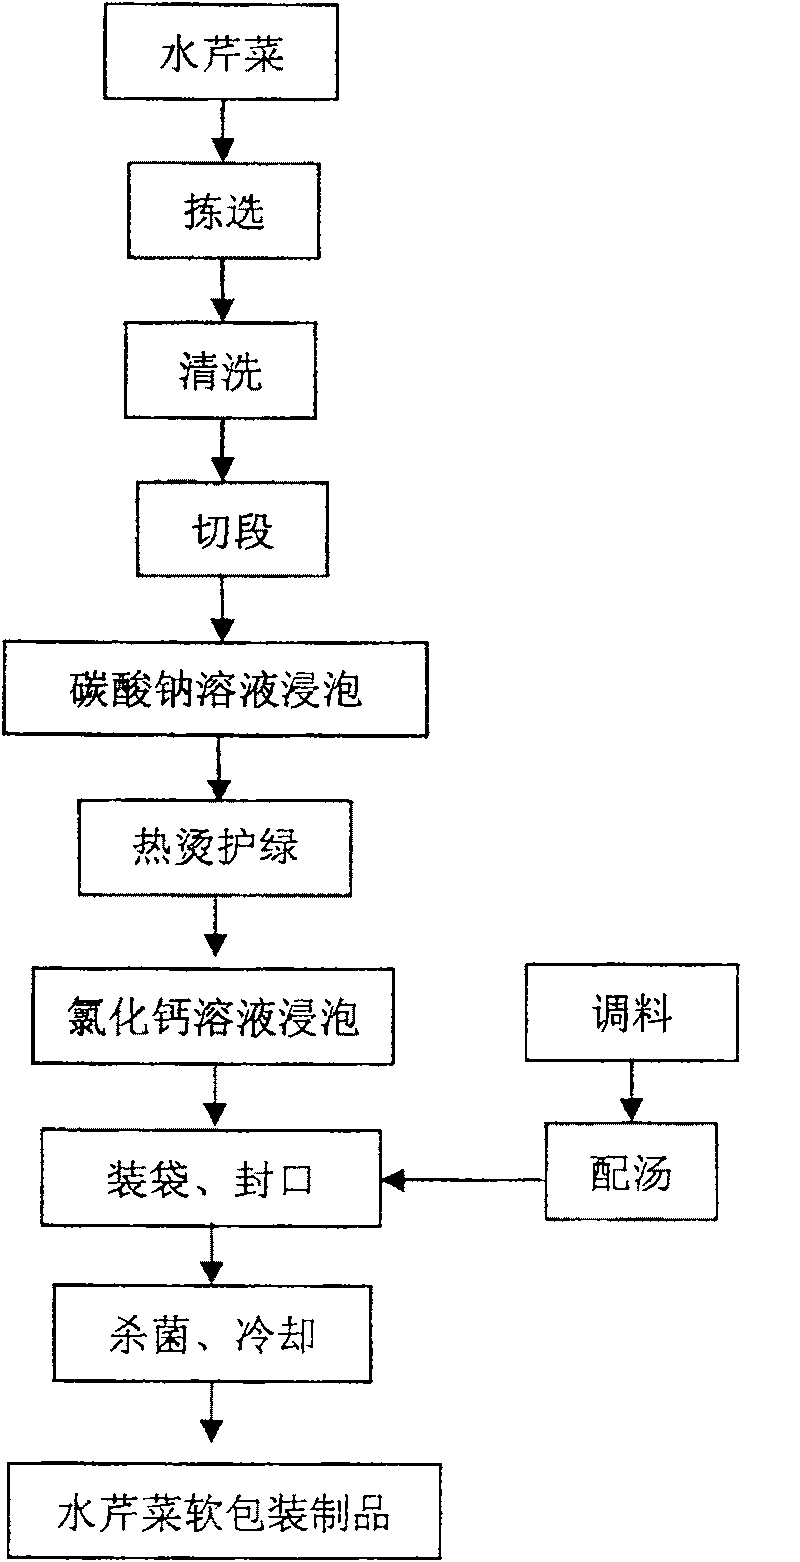 Processing method of an oenanthe javanica product with soft package